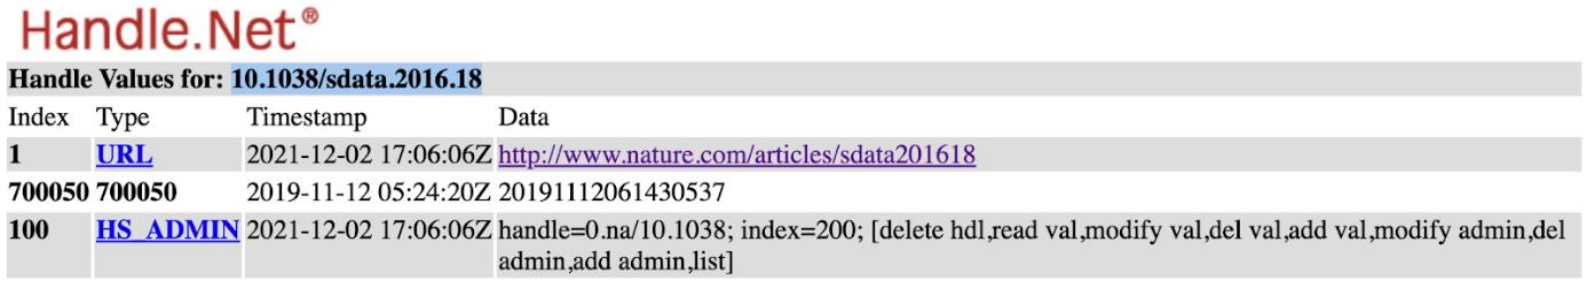 Handle PID record: https://hdl.handle.net/10.1038/sdata.2016.18?noredirect of the FAIR principle article. These metadata can also be harvested via an API.